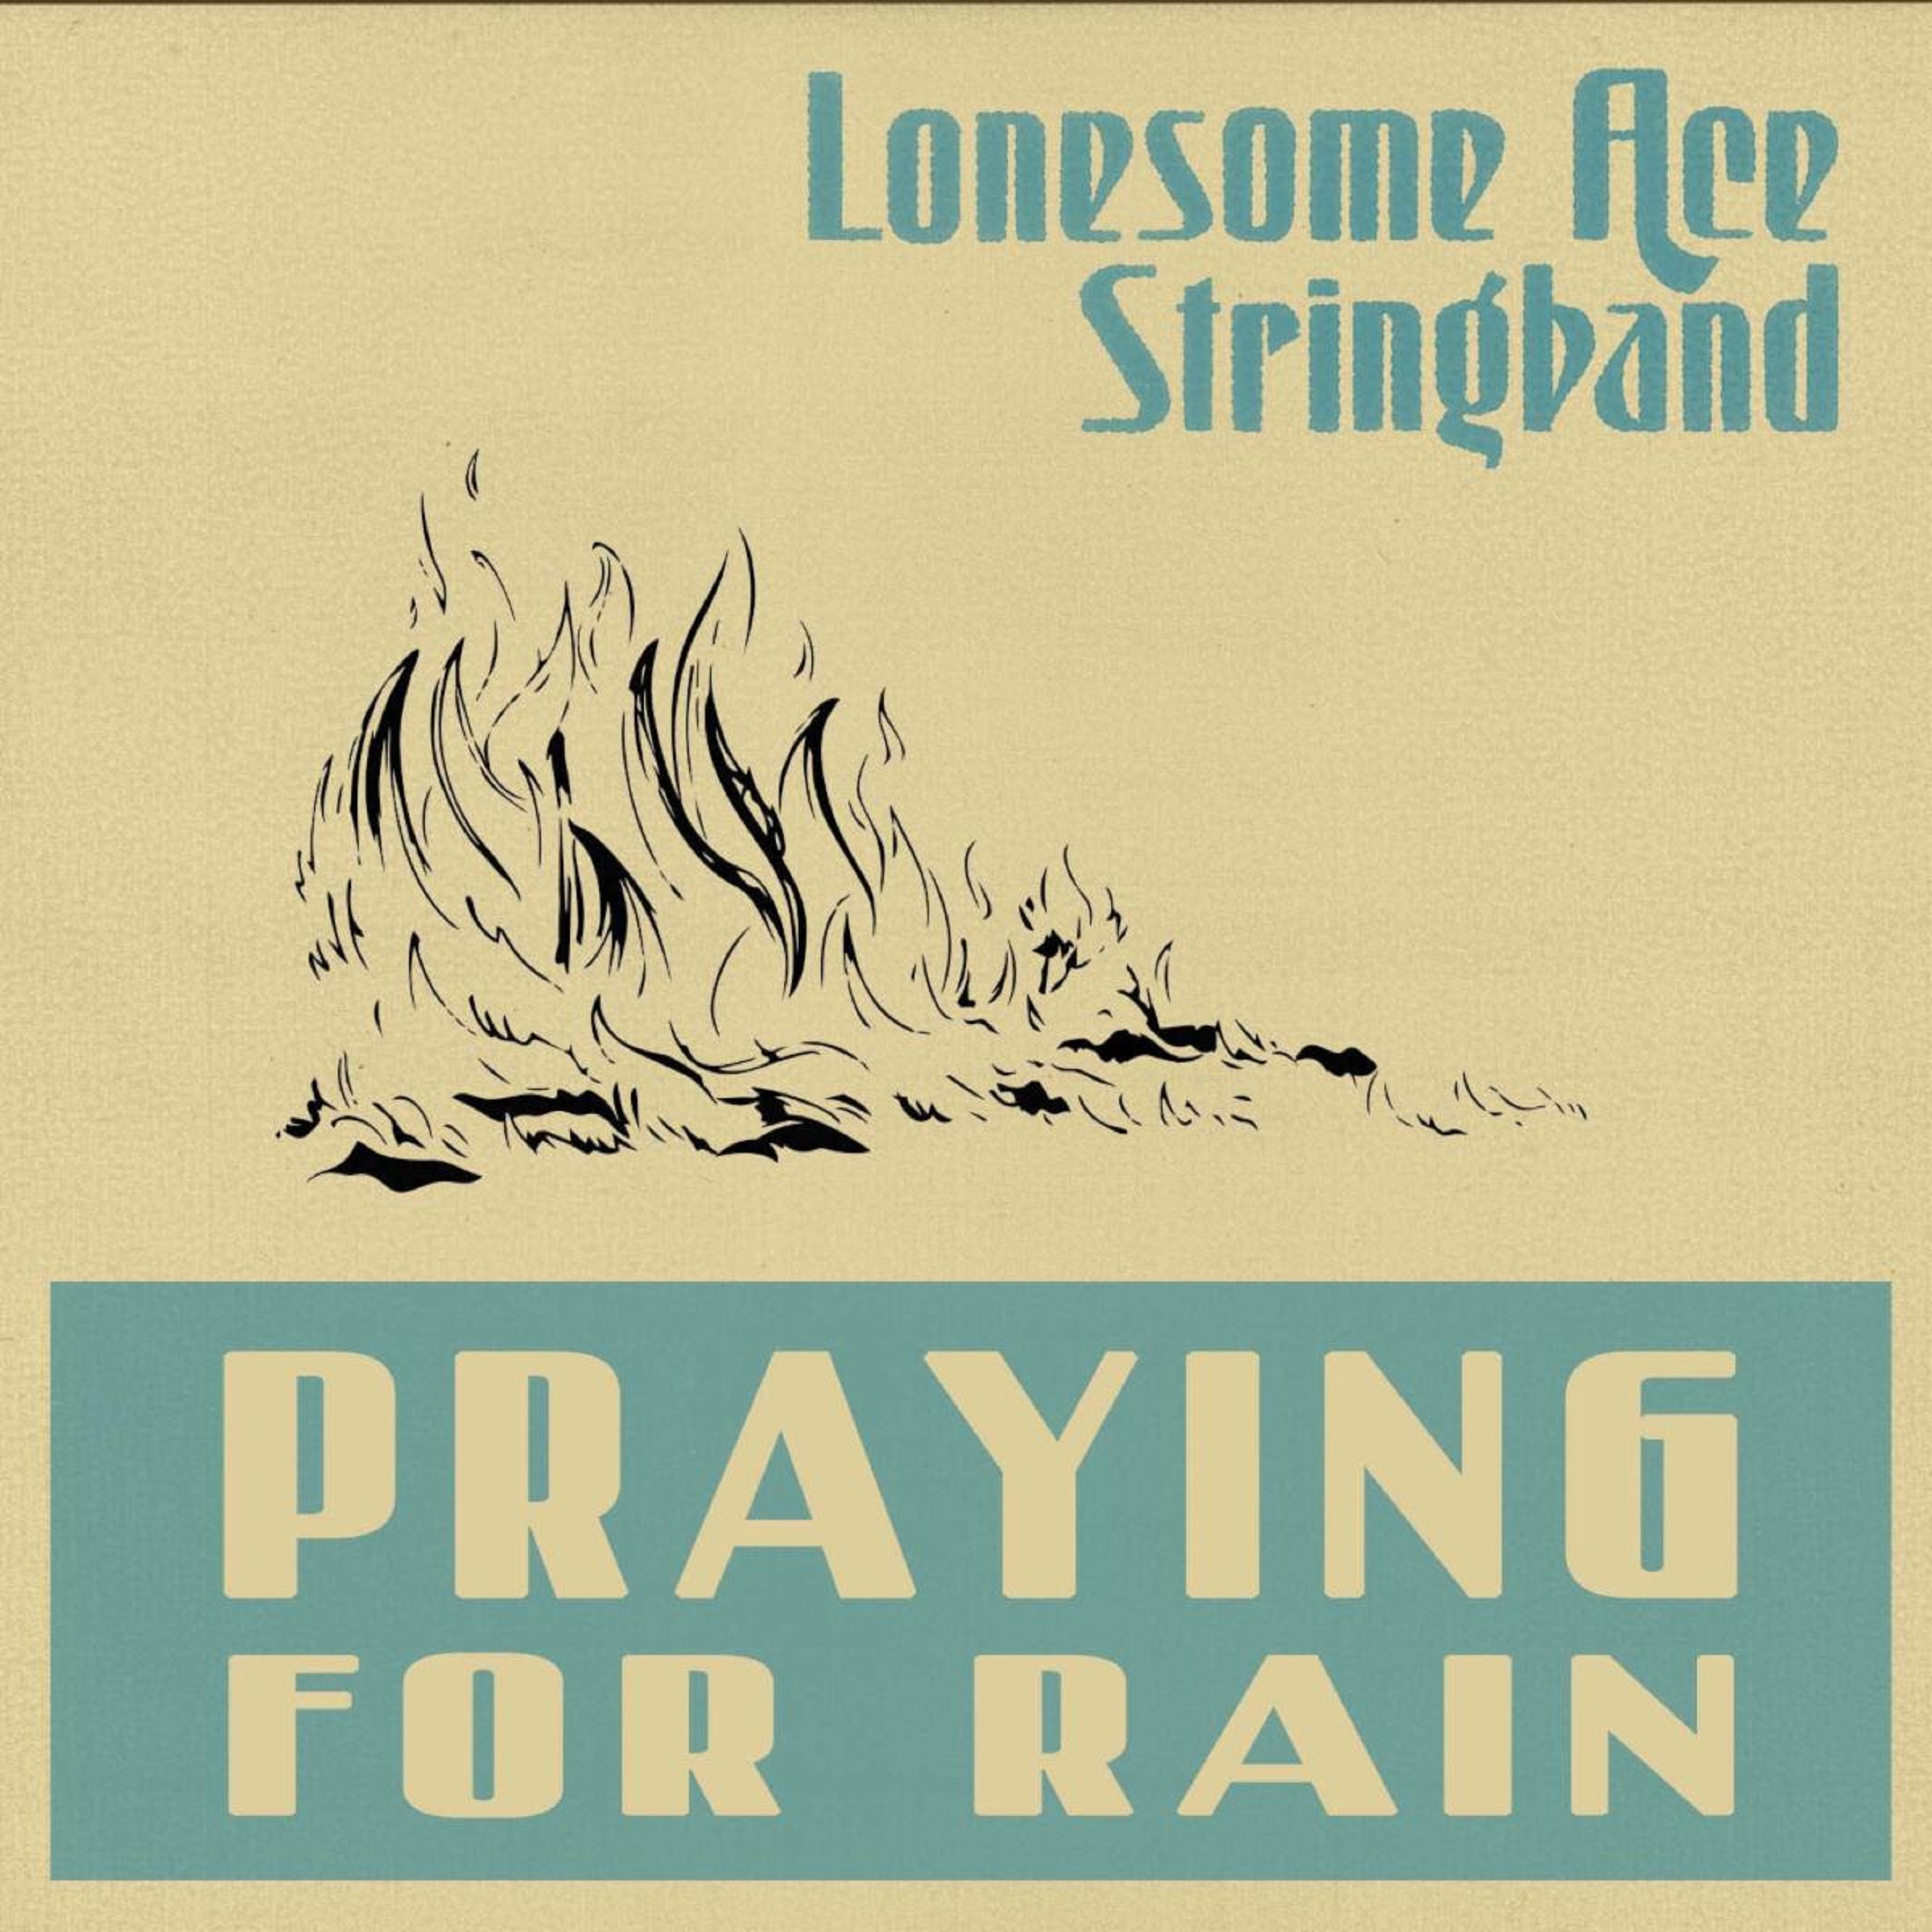 Lonesome Ace Stringband Put An Old Time Feel To A Modern Day Issue With Brand New Single “Praying For Rain”